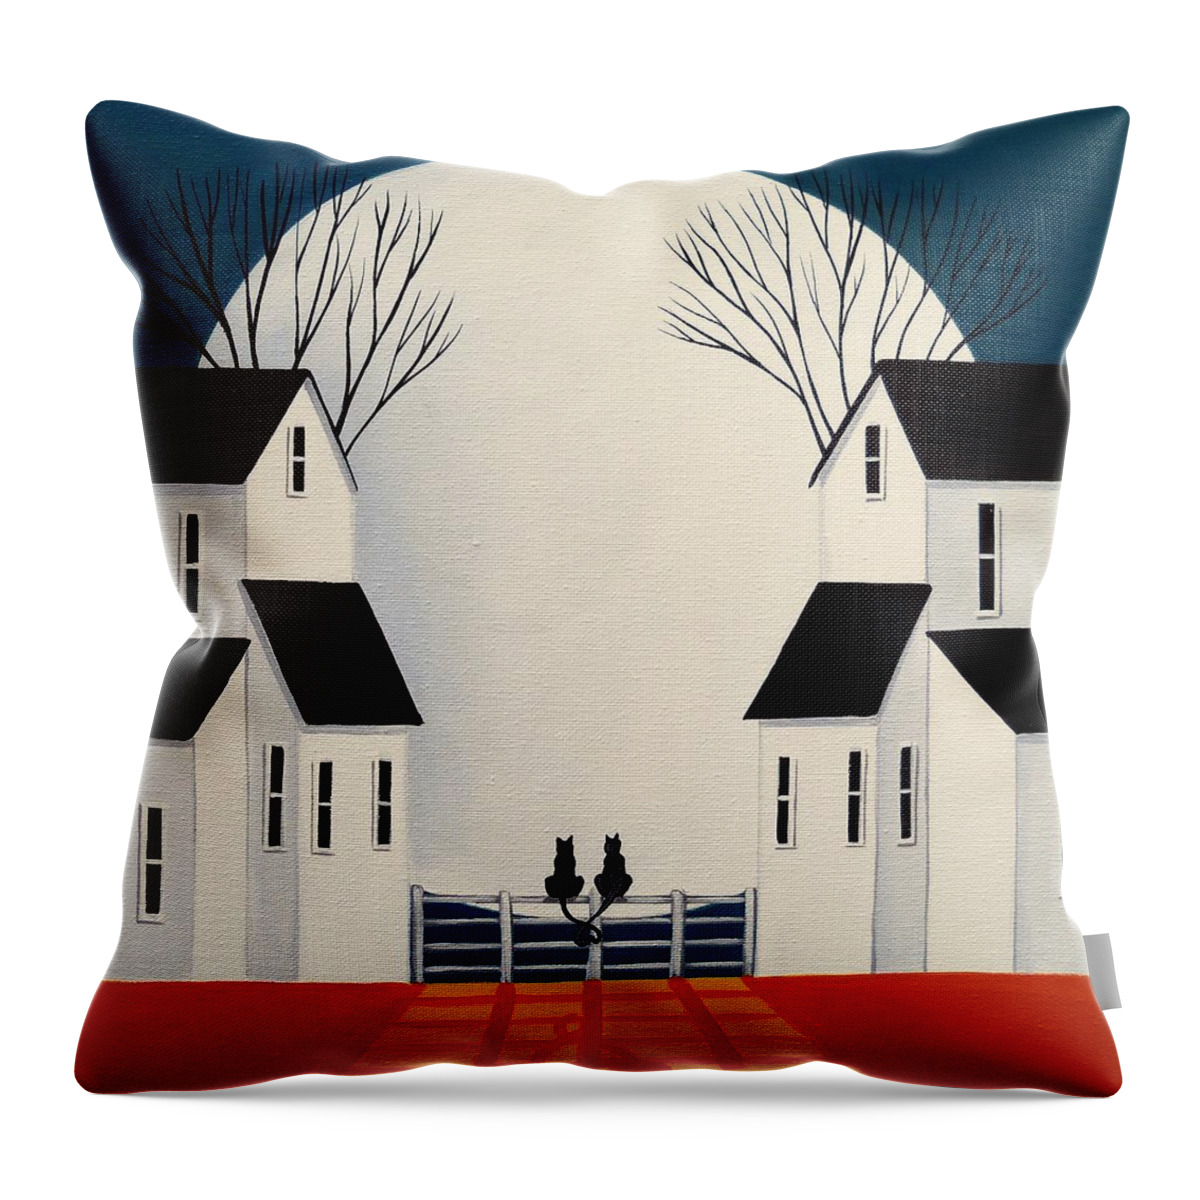 Black Throw Pillow featuring the painting Love Me For All My Nine Lives by Debbie Criswell